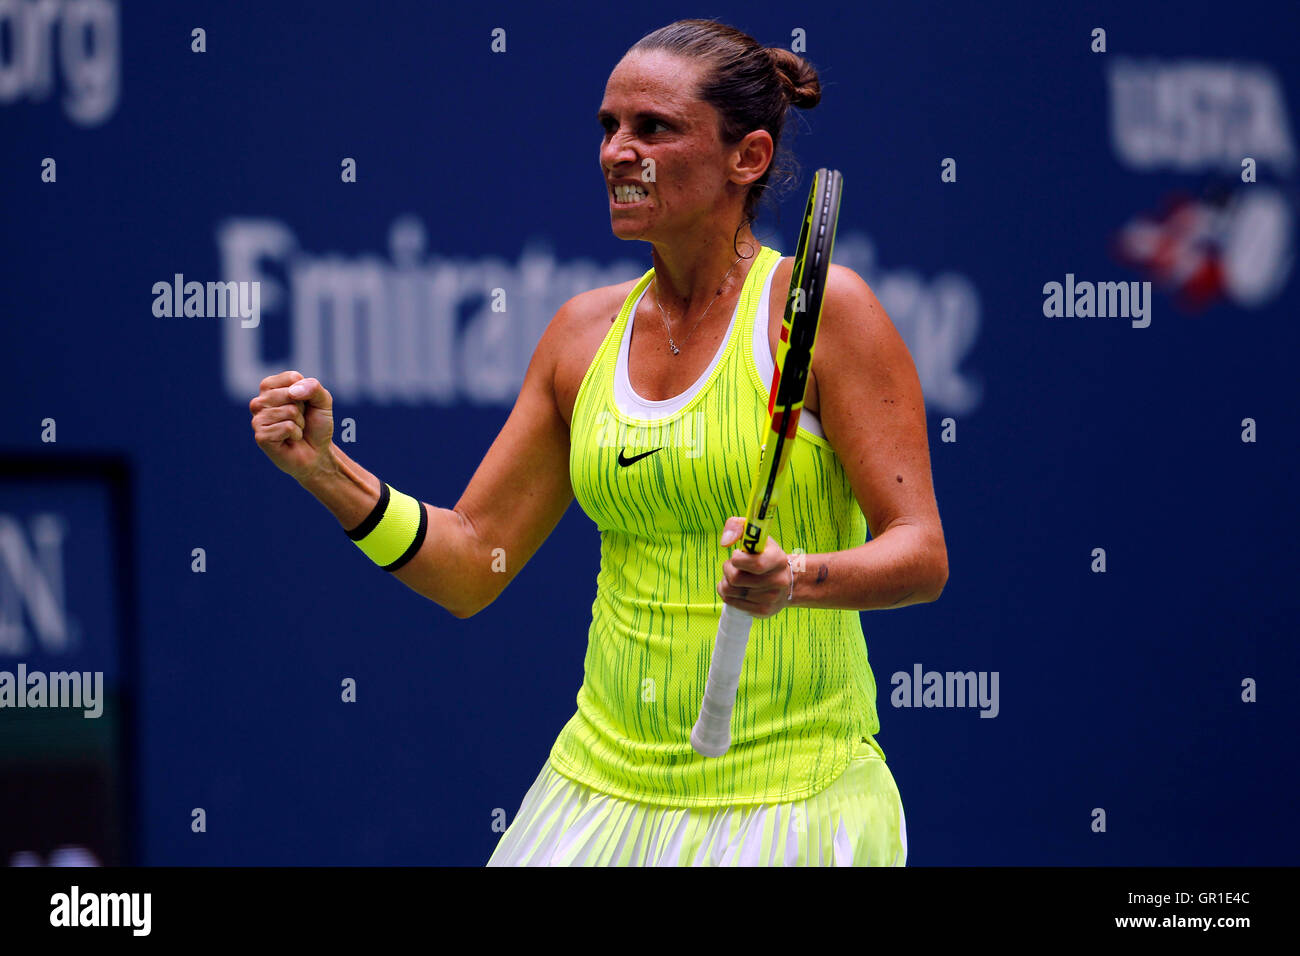 New York, USA. 6th September, 2016. Number 7 seed, Roberta Vinci of Italy reacts to a point during her quarter final match against Number 2 seed, Angelique Kerber of Germany at the United States Open Tennis Championships at Flushing Meadows, New York on Tuesday, September 6th.   Kerber won the match 7-5, 6-0 Credit:  Adam Stoltman/Alamy Live News Stock Photo